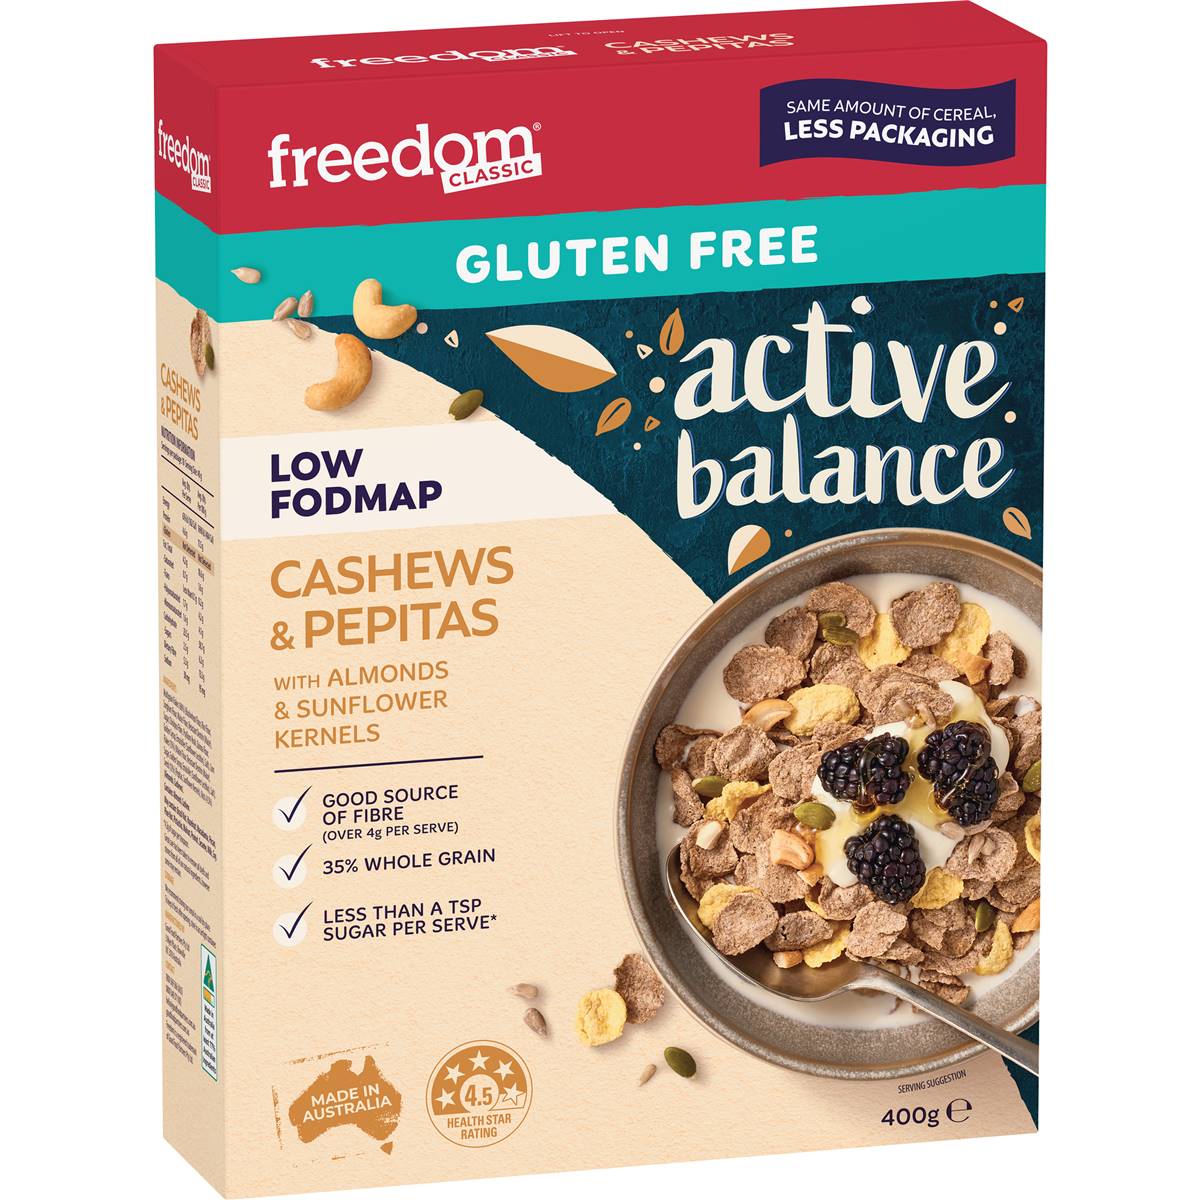 Calories in Freedom Active Balance Cashews & Pepitas Cereal